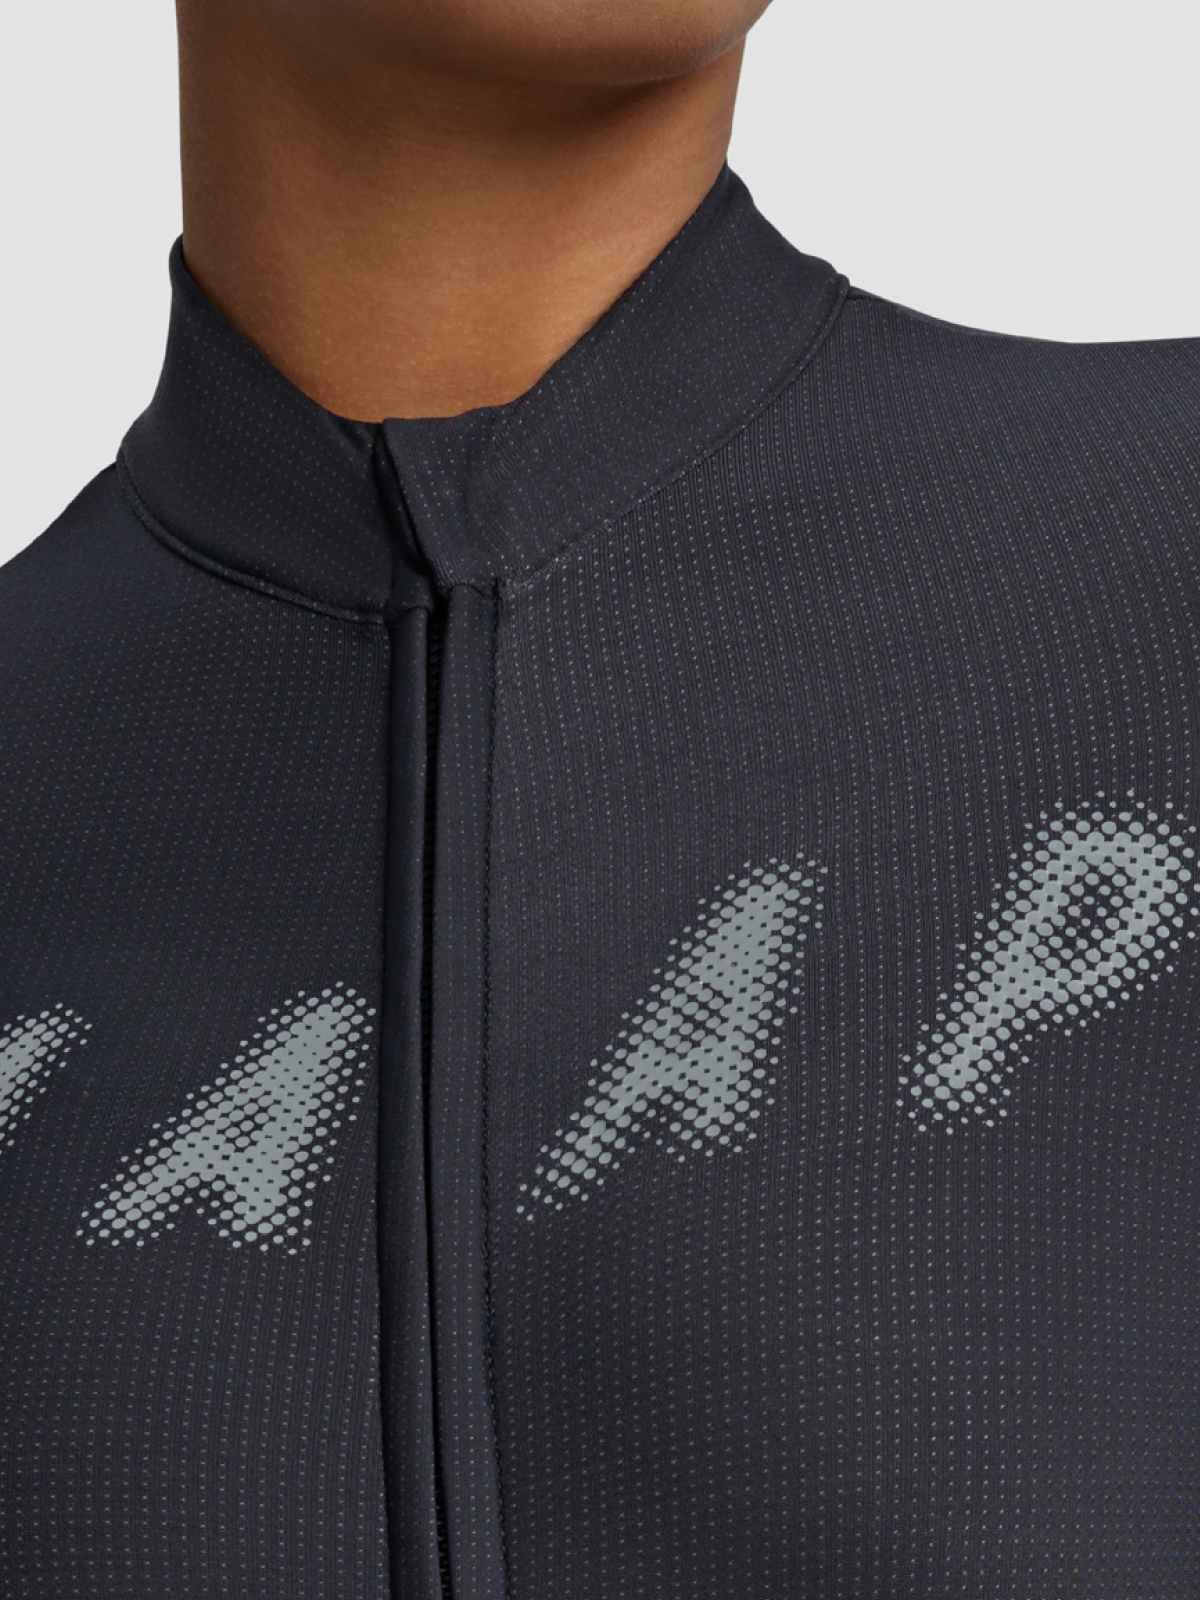 Women's Halftone Thermal Pro LS Jersey